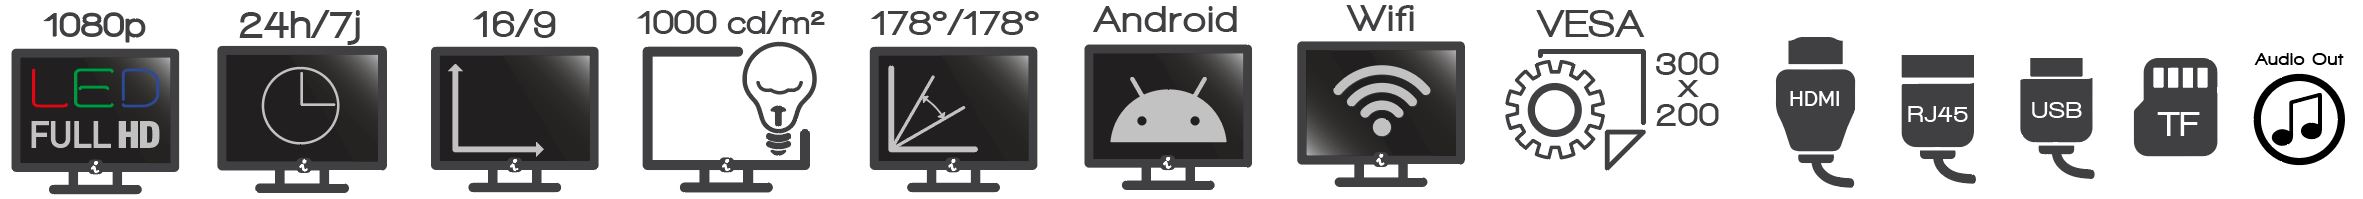 Pictos H-DID32 Android